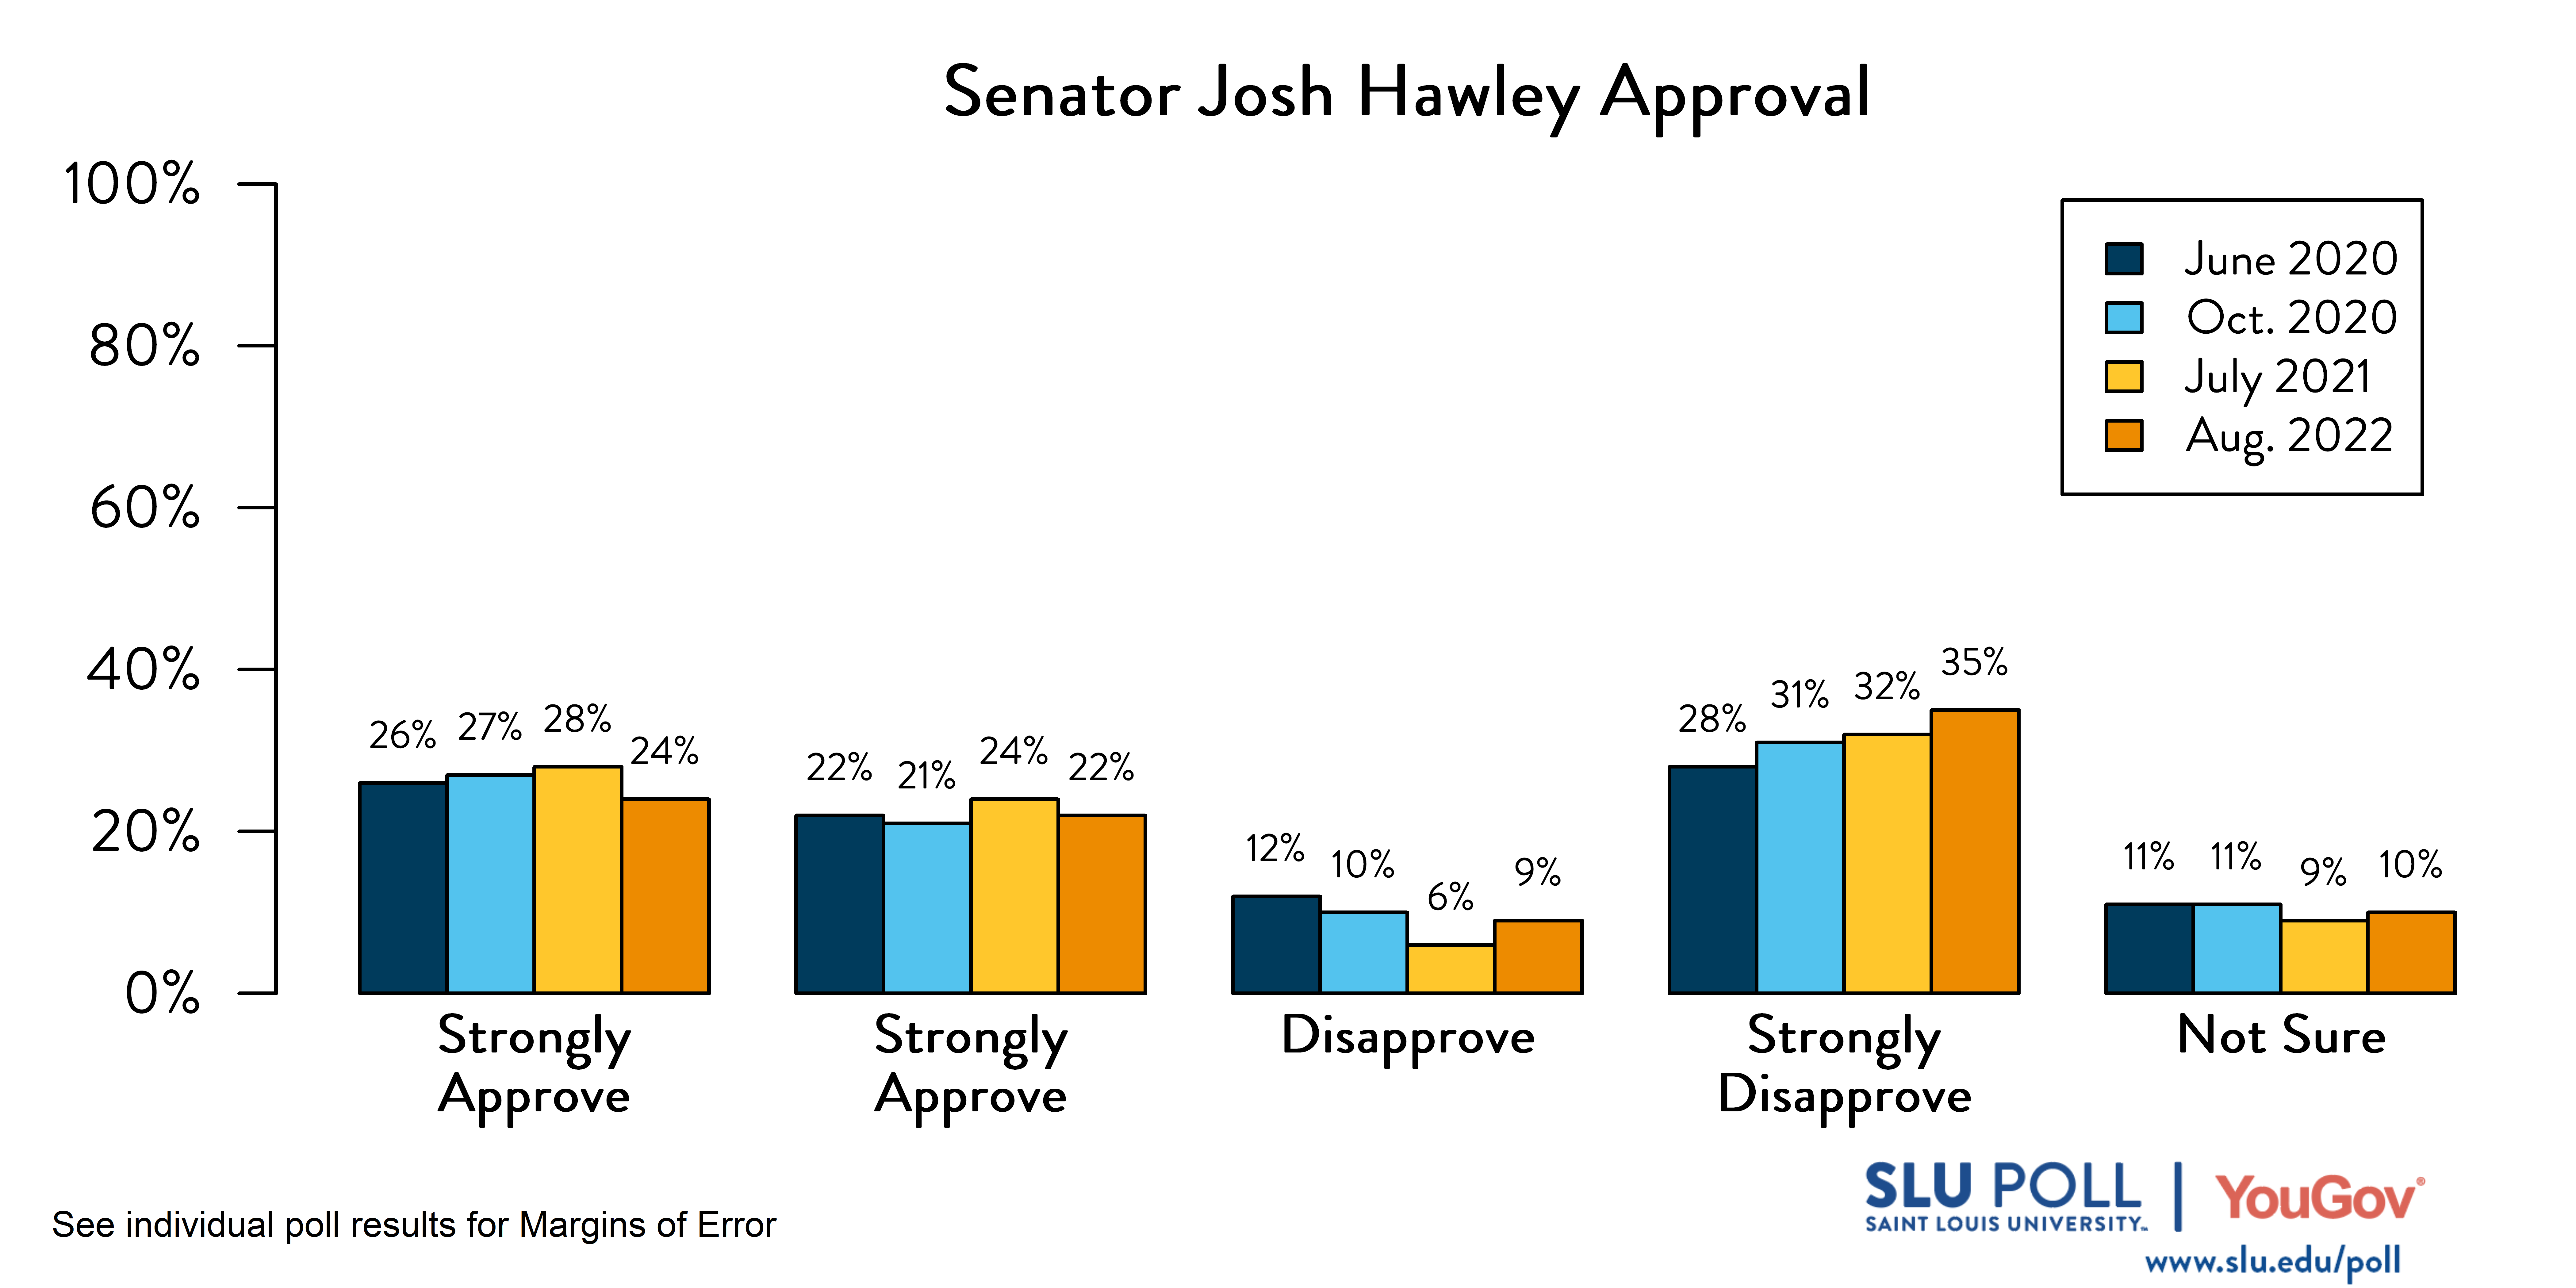 Likely voters' responses to 'Do you approve or disapprove of the way each is doing their job: Senator Josh Hawley?'. June 2020 Voter Responses 26% Strongly Approve, 22% Approve, 12% Disapprove, 28% Strongly Disapprove, and 11% Not sure. October 2020 Voter Responses: 27% Strongly approve, 21% Approve, 10% Disapprove, 31% Strongly disapprove, and 11% Not sure. July 2021 Voter Responses: 28% Strongly approve, 24% Approve, 6% Disapprove, 32% Strongly disapprove, and 9% Not sure. August 2021 Voter Responses: 24% Strongly approve, 22% Approve, 9% Disapprove, 35% Strongly disapprove, and 10% Not sure.